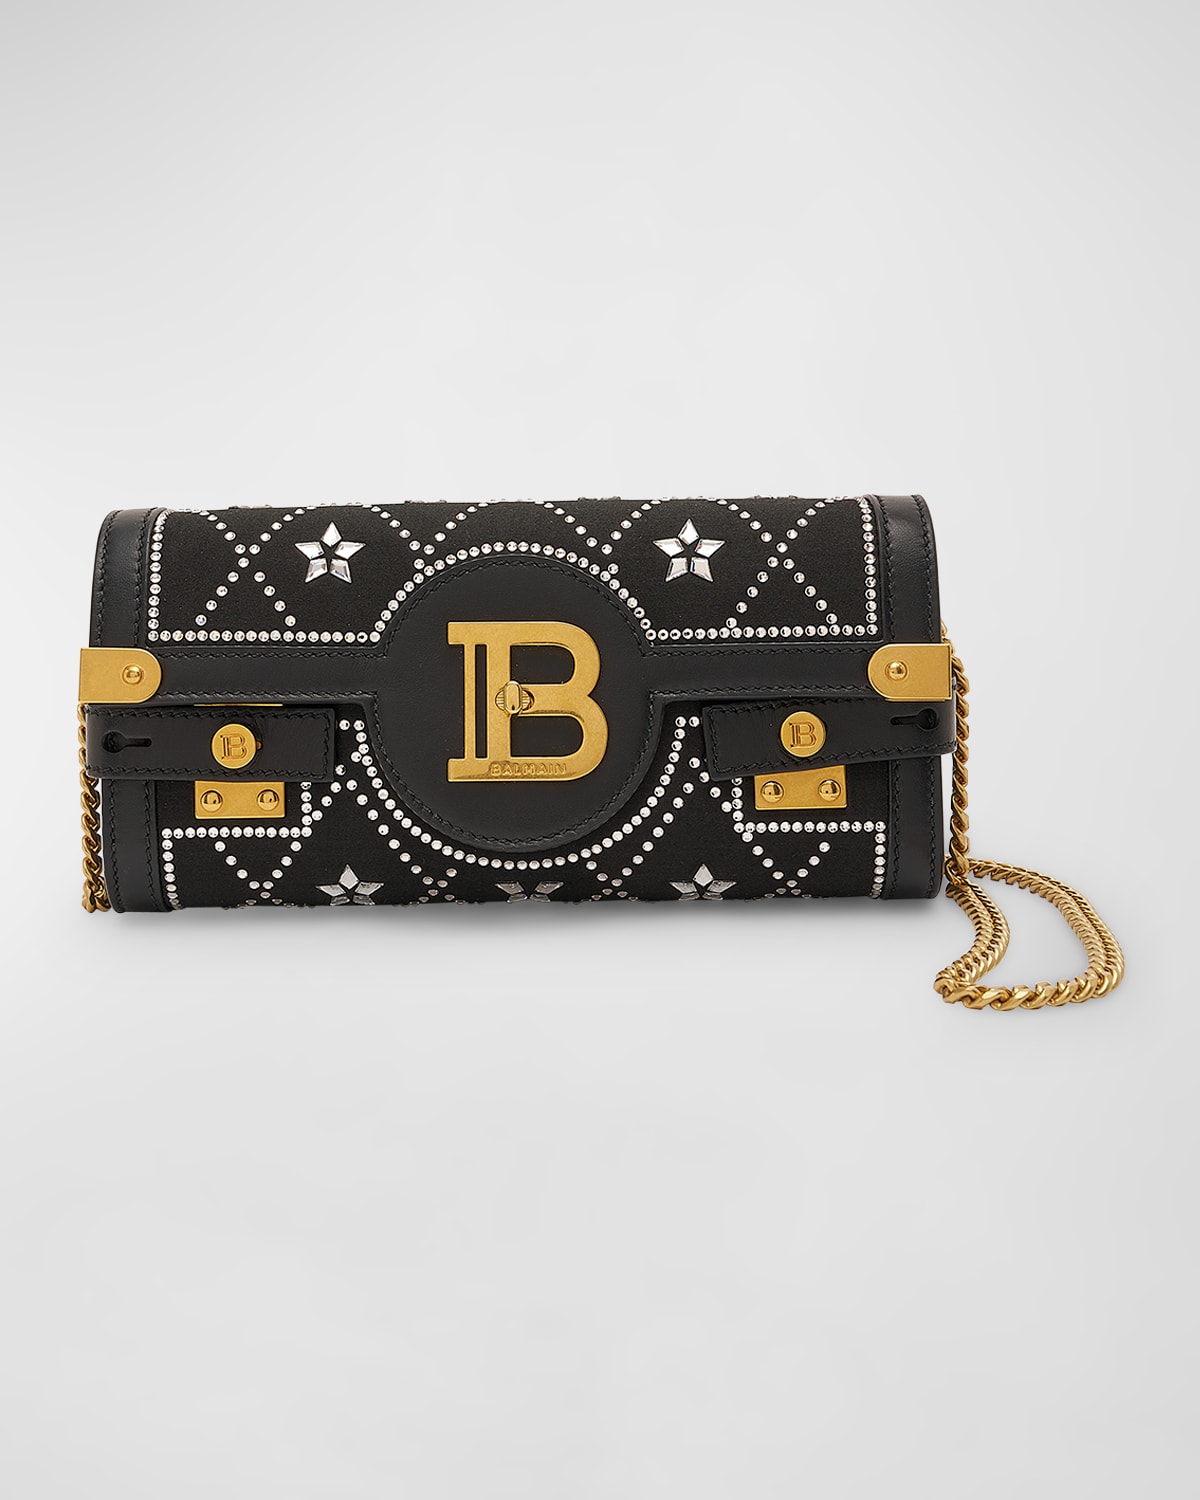 BBuzz 23 Wallet on a Chain in Satin with Crystals